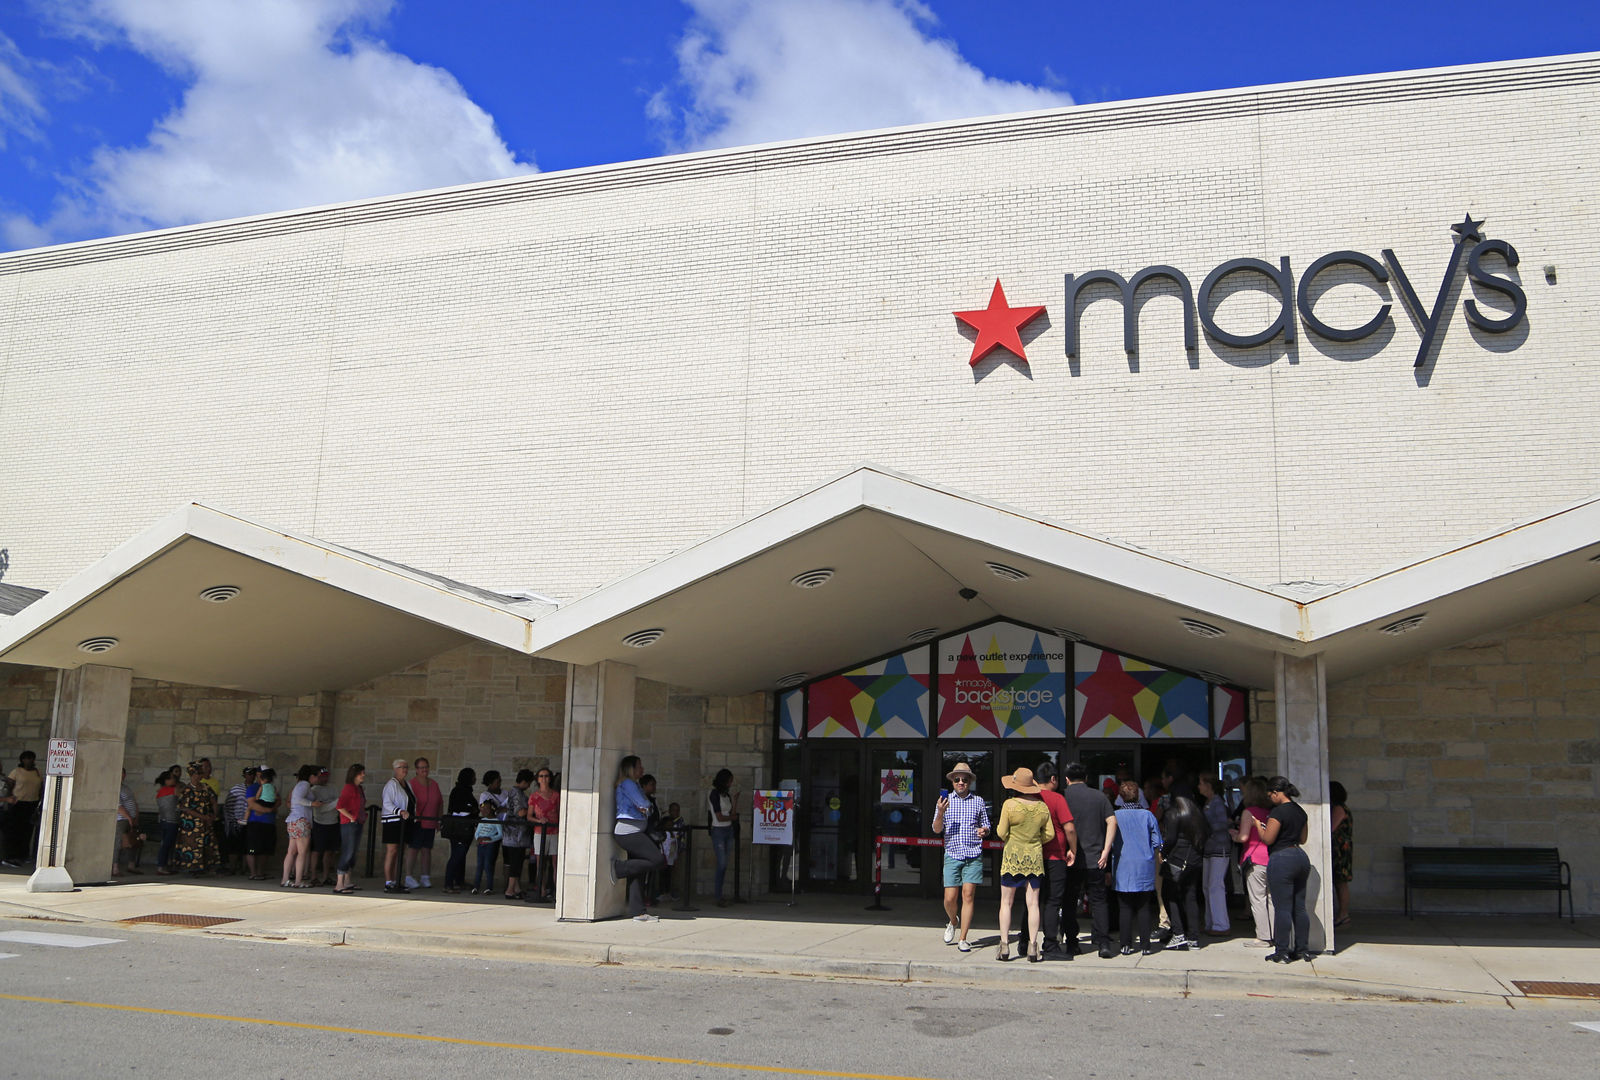 Shoppers are seen taking in the grand opening of Macy's Mayfair Backstage event, Saturday, June 24, 2017 in Wauwatosa, Wis. (Darren Hauck/AP Images for Macy's)